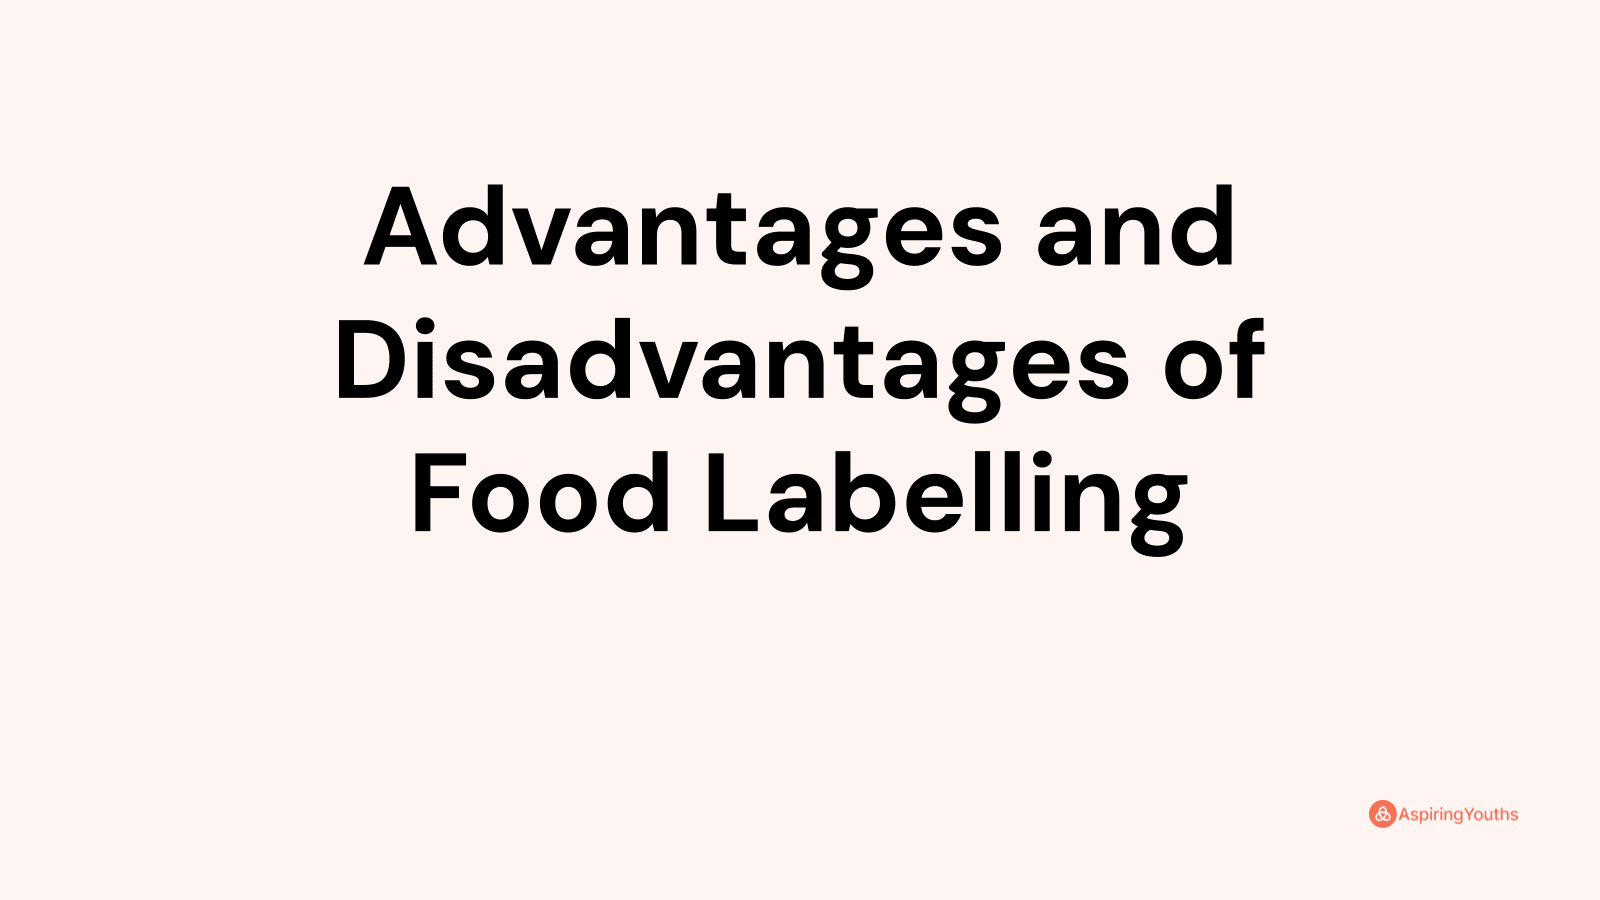 Advantages and disadvantages of Food Labelling